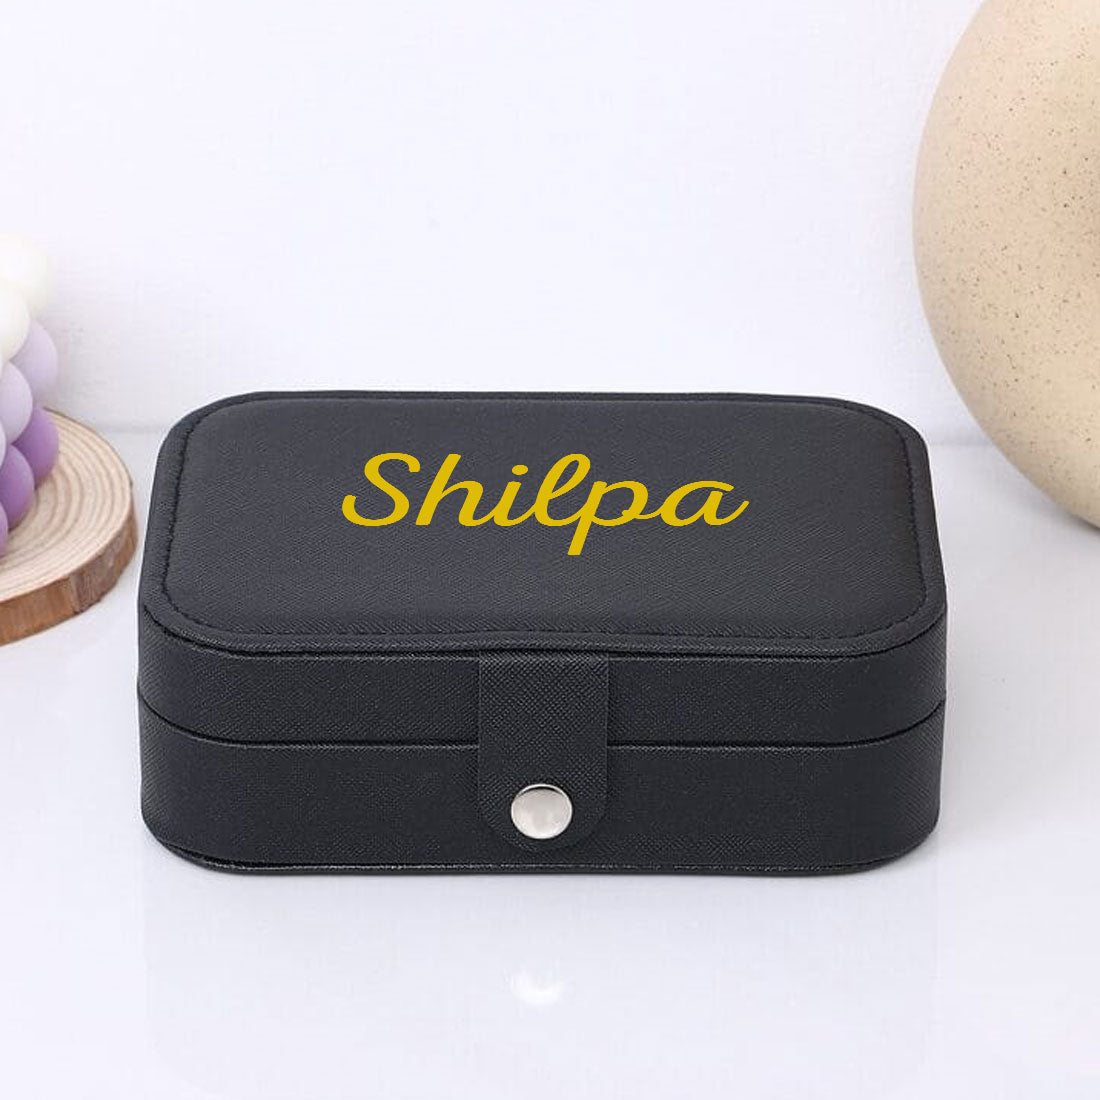 Customized Jewellery Box Holder for Travel Storage Case for Rings Earrings and Pendants